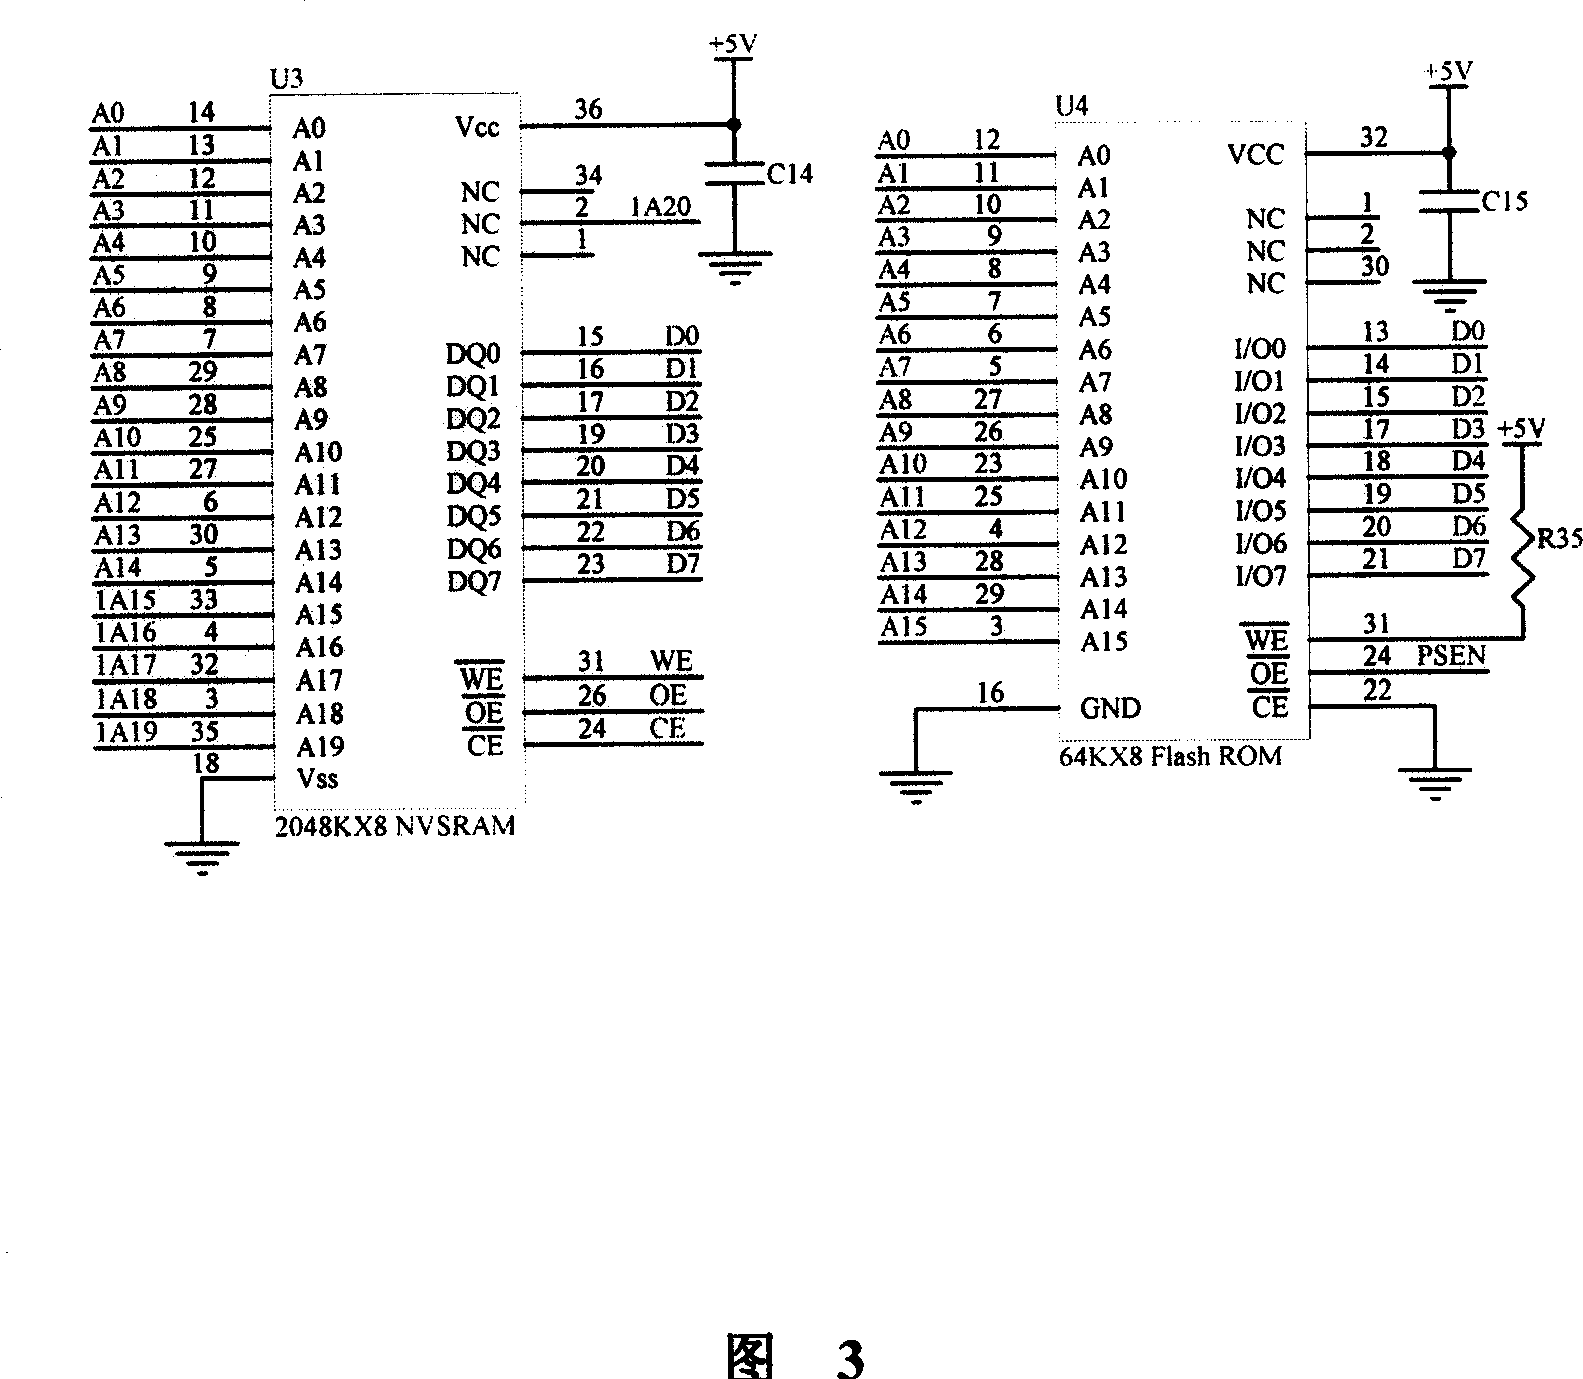 Marking controller based on USB interface